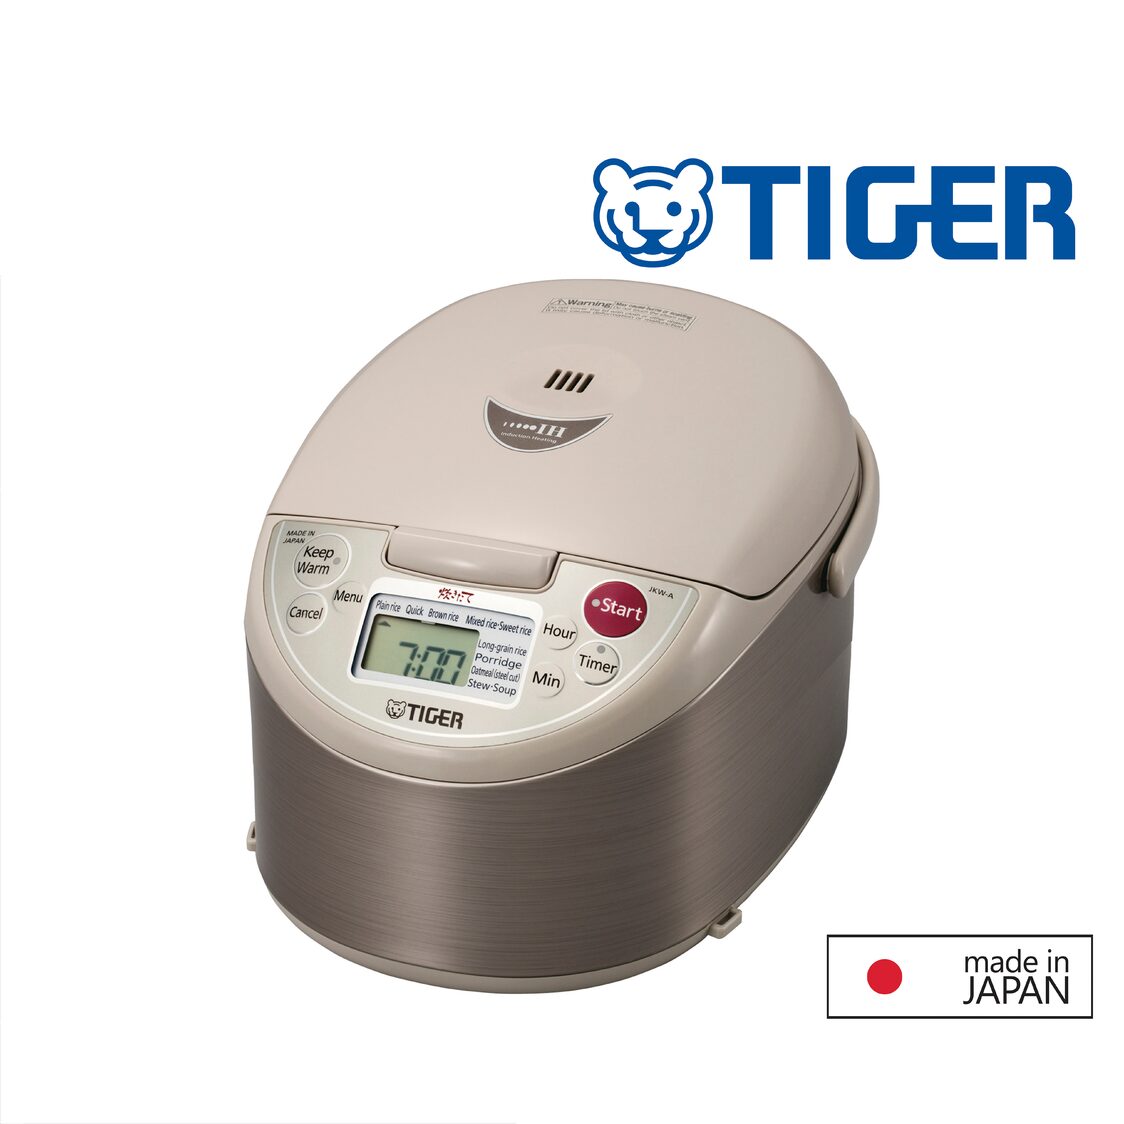 Tiger 18L 3 Layer Induction Hearting Rice Cooker JKW-A18S